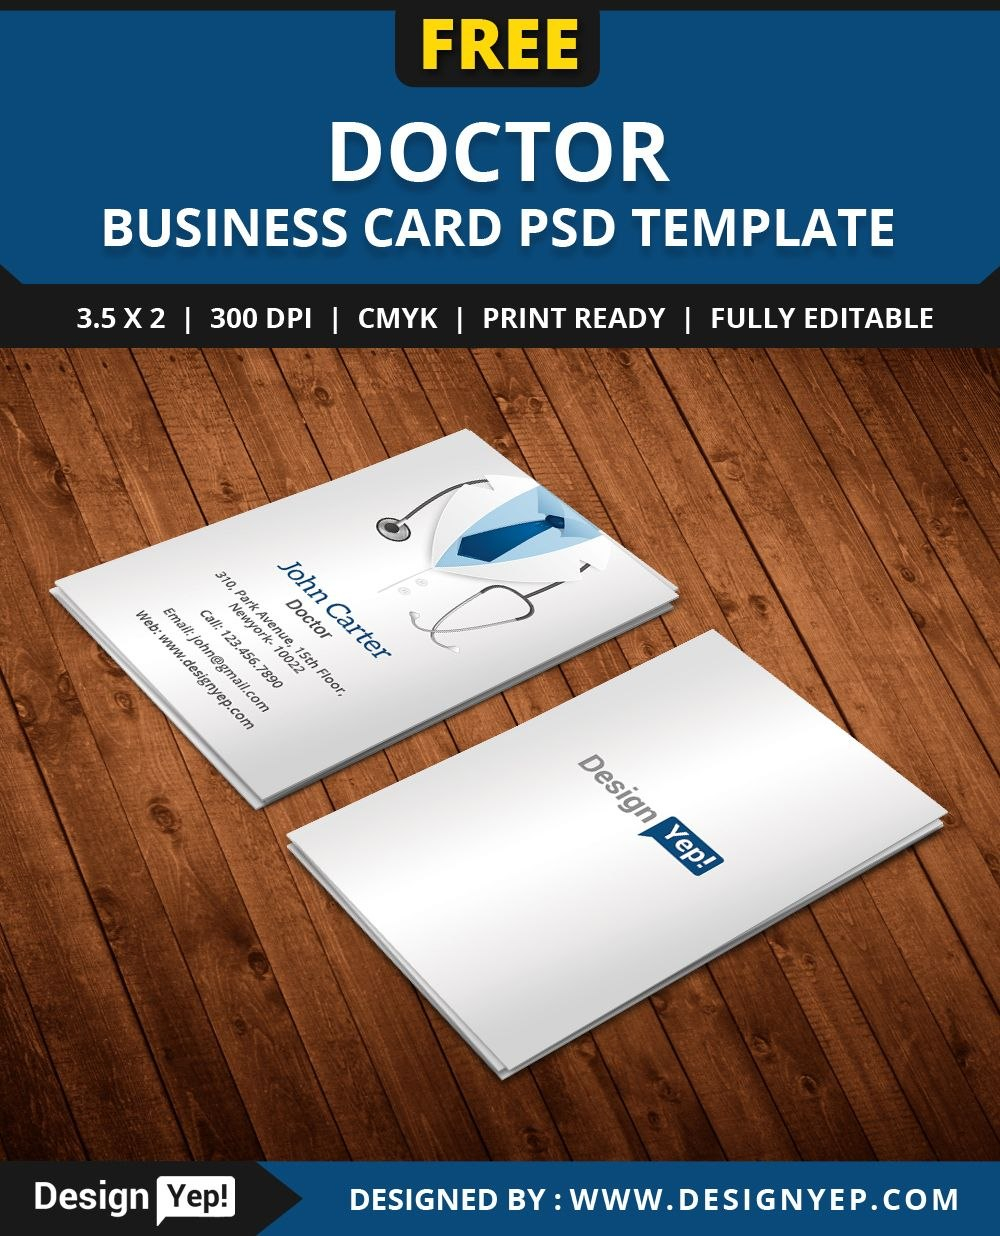 Freedoctorbusinesscardtemplatepsd  Free Business Card within Free Complimentary Card Templates